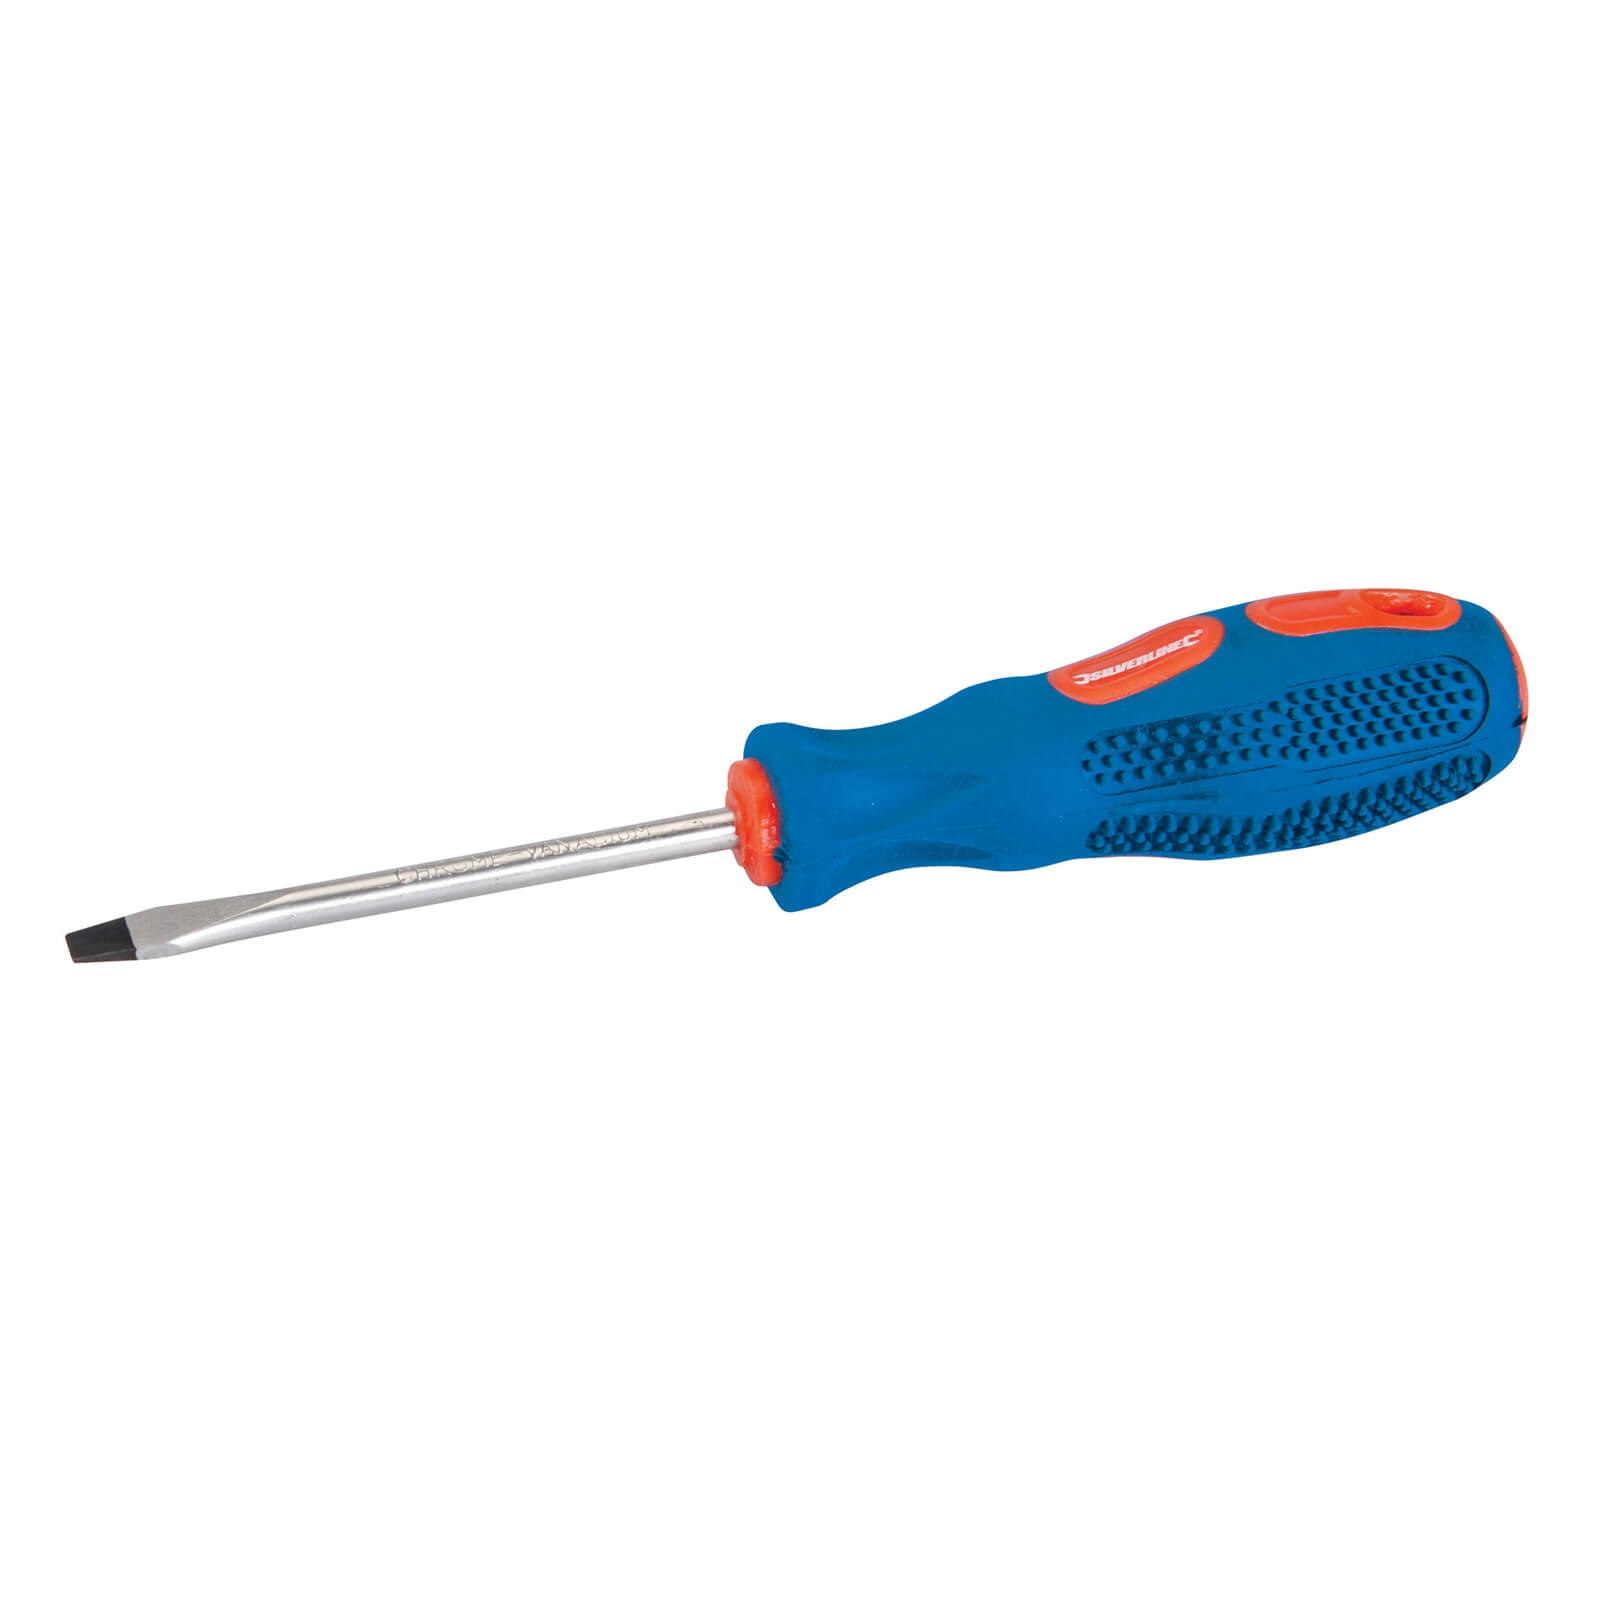 Silverline General Purpose Screwdriver Slotted Flared 5 x 75mm